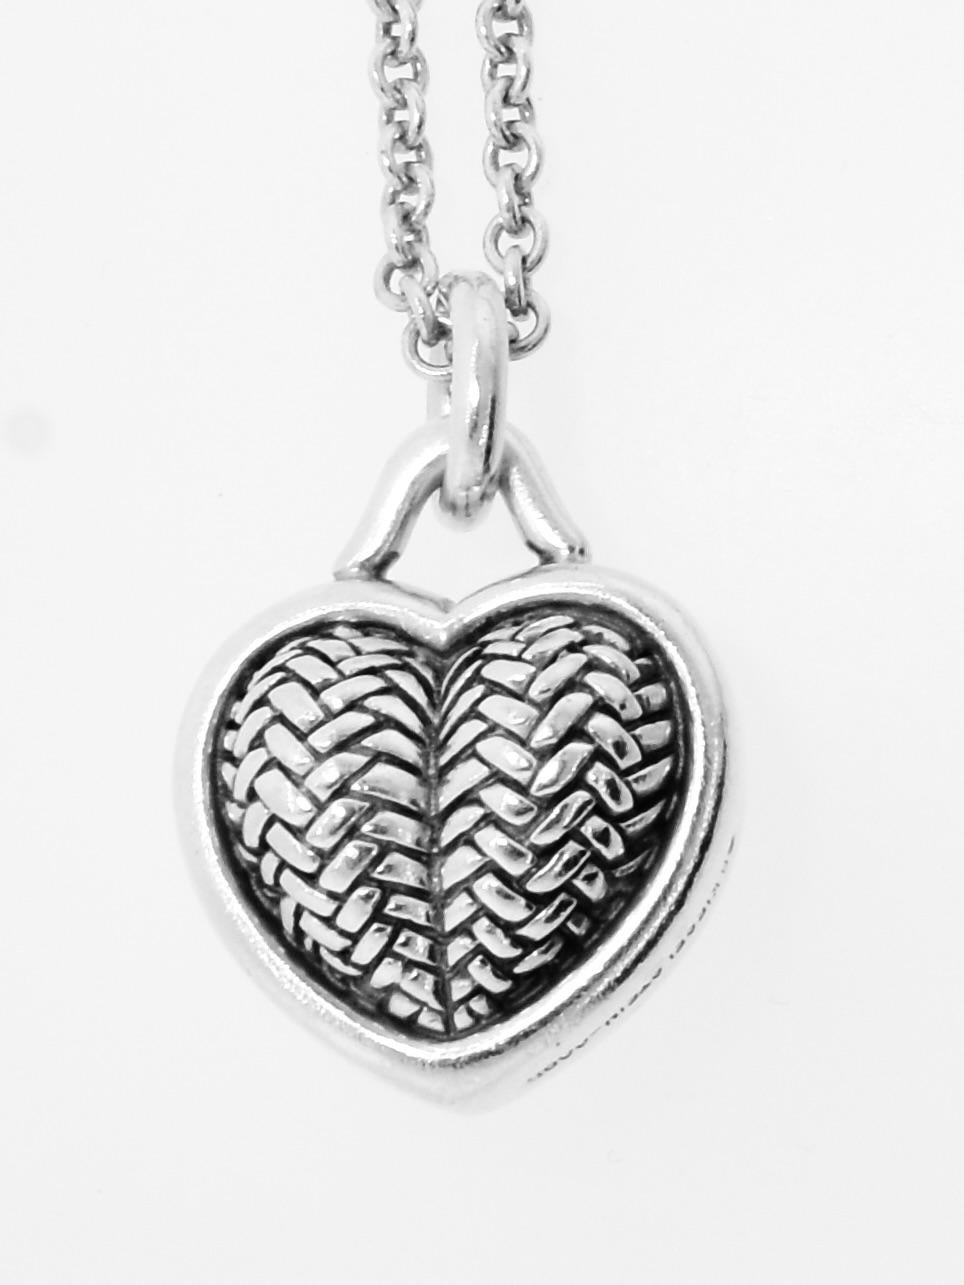 Contemporary B. Kieselstein-Cord Vintage Sterling Silver Heart Pendant Necklace, 34